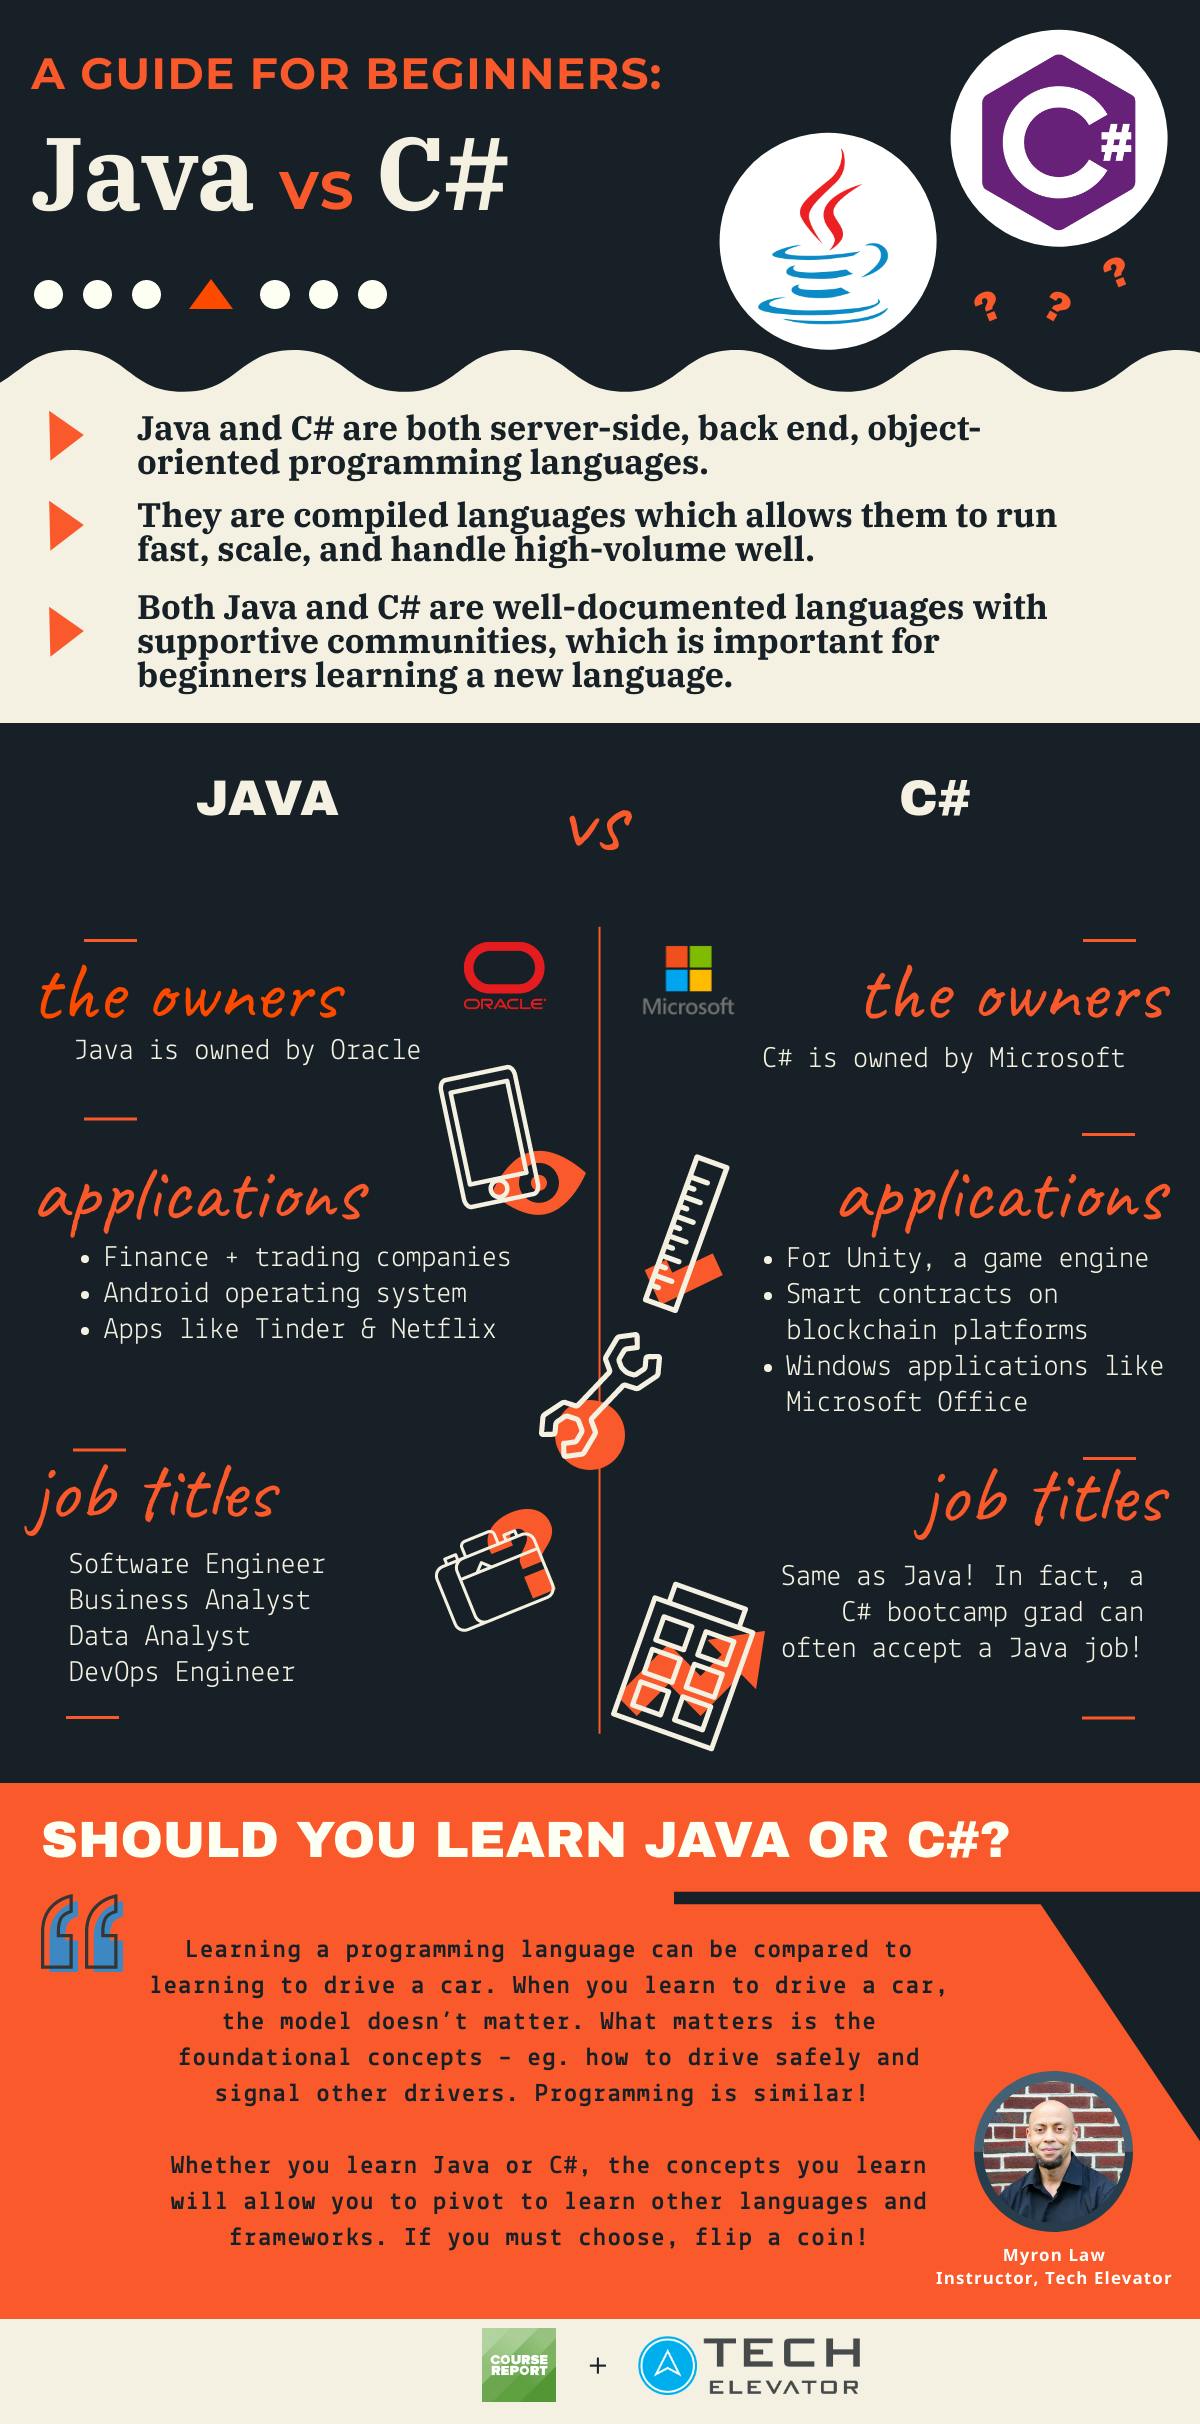 Which is harder C# or Java?